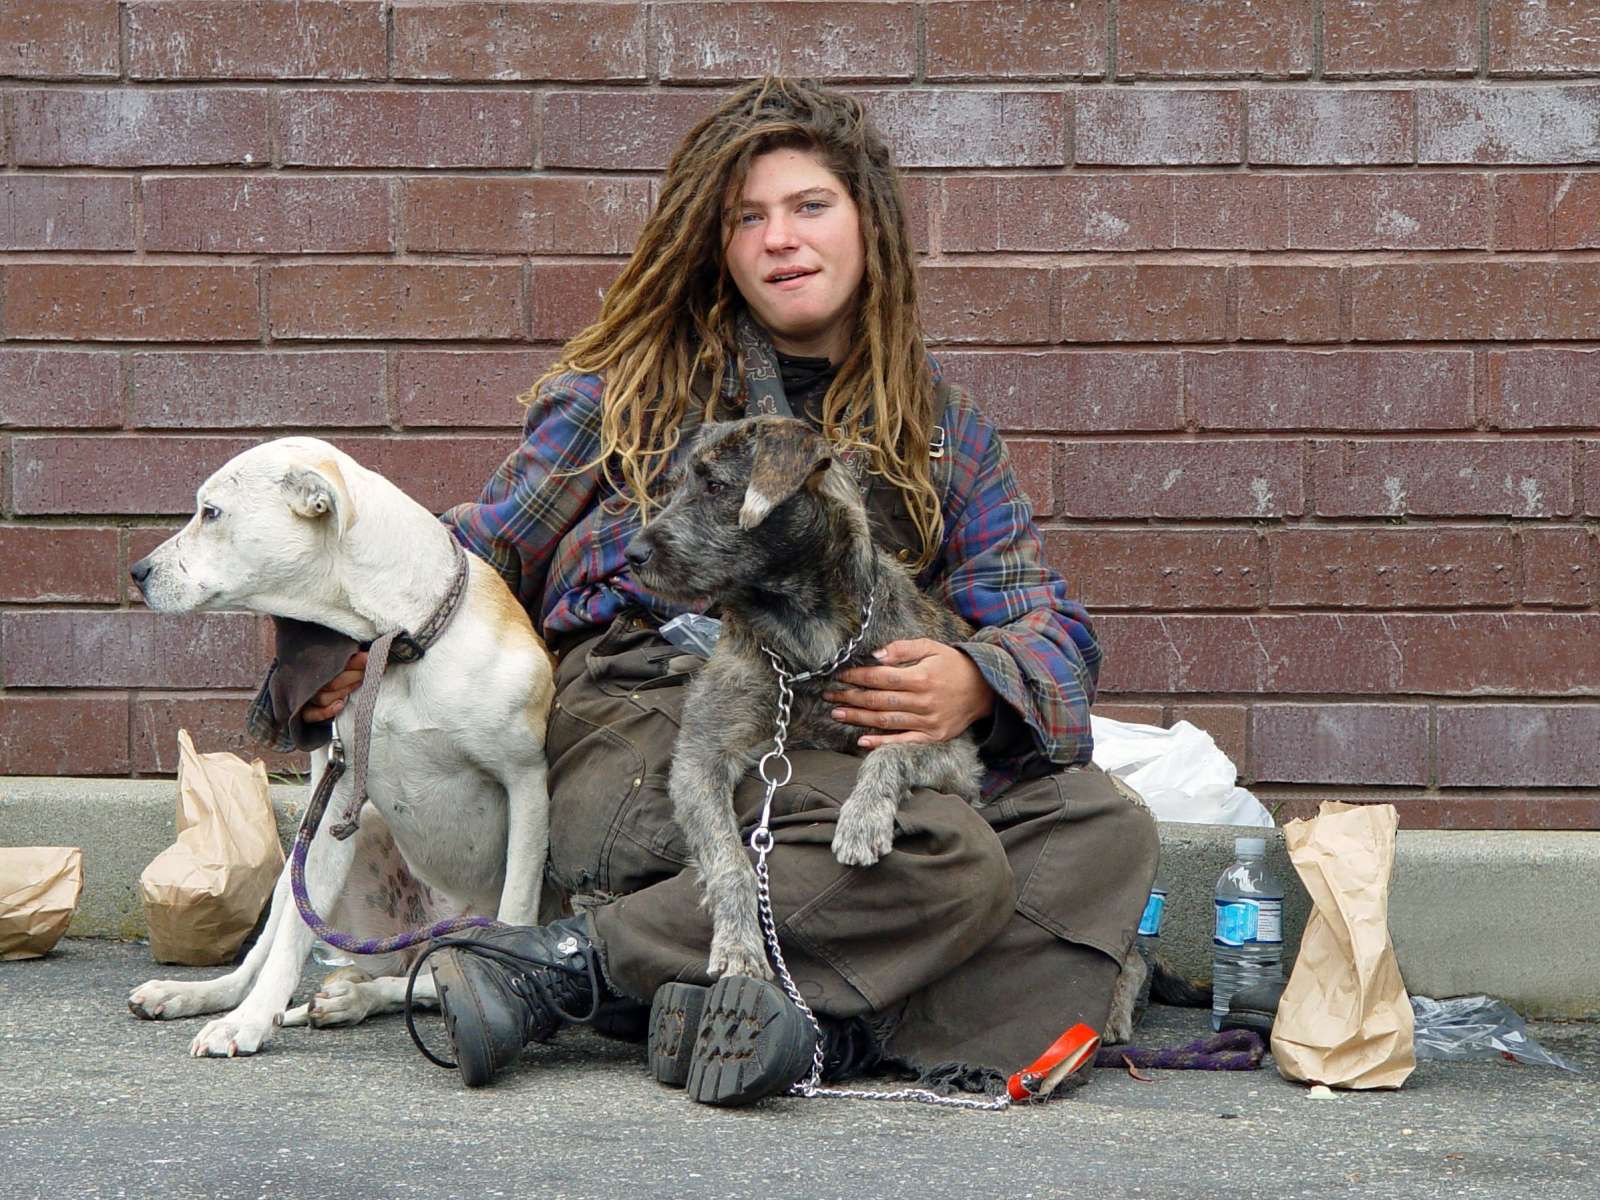 If passed, a new bill would allow homeless people to sit on San Francisco streets 24 hours a day without being arrested or cited. (Franco Folini/Flickr)